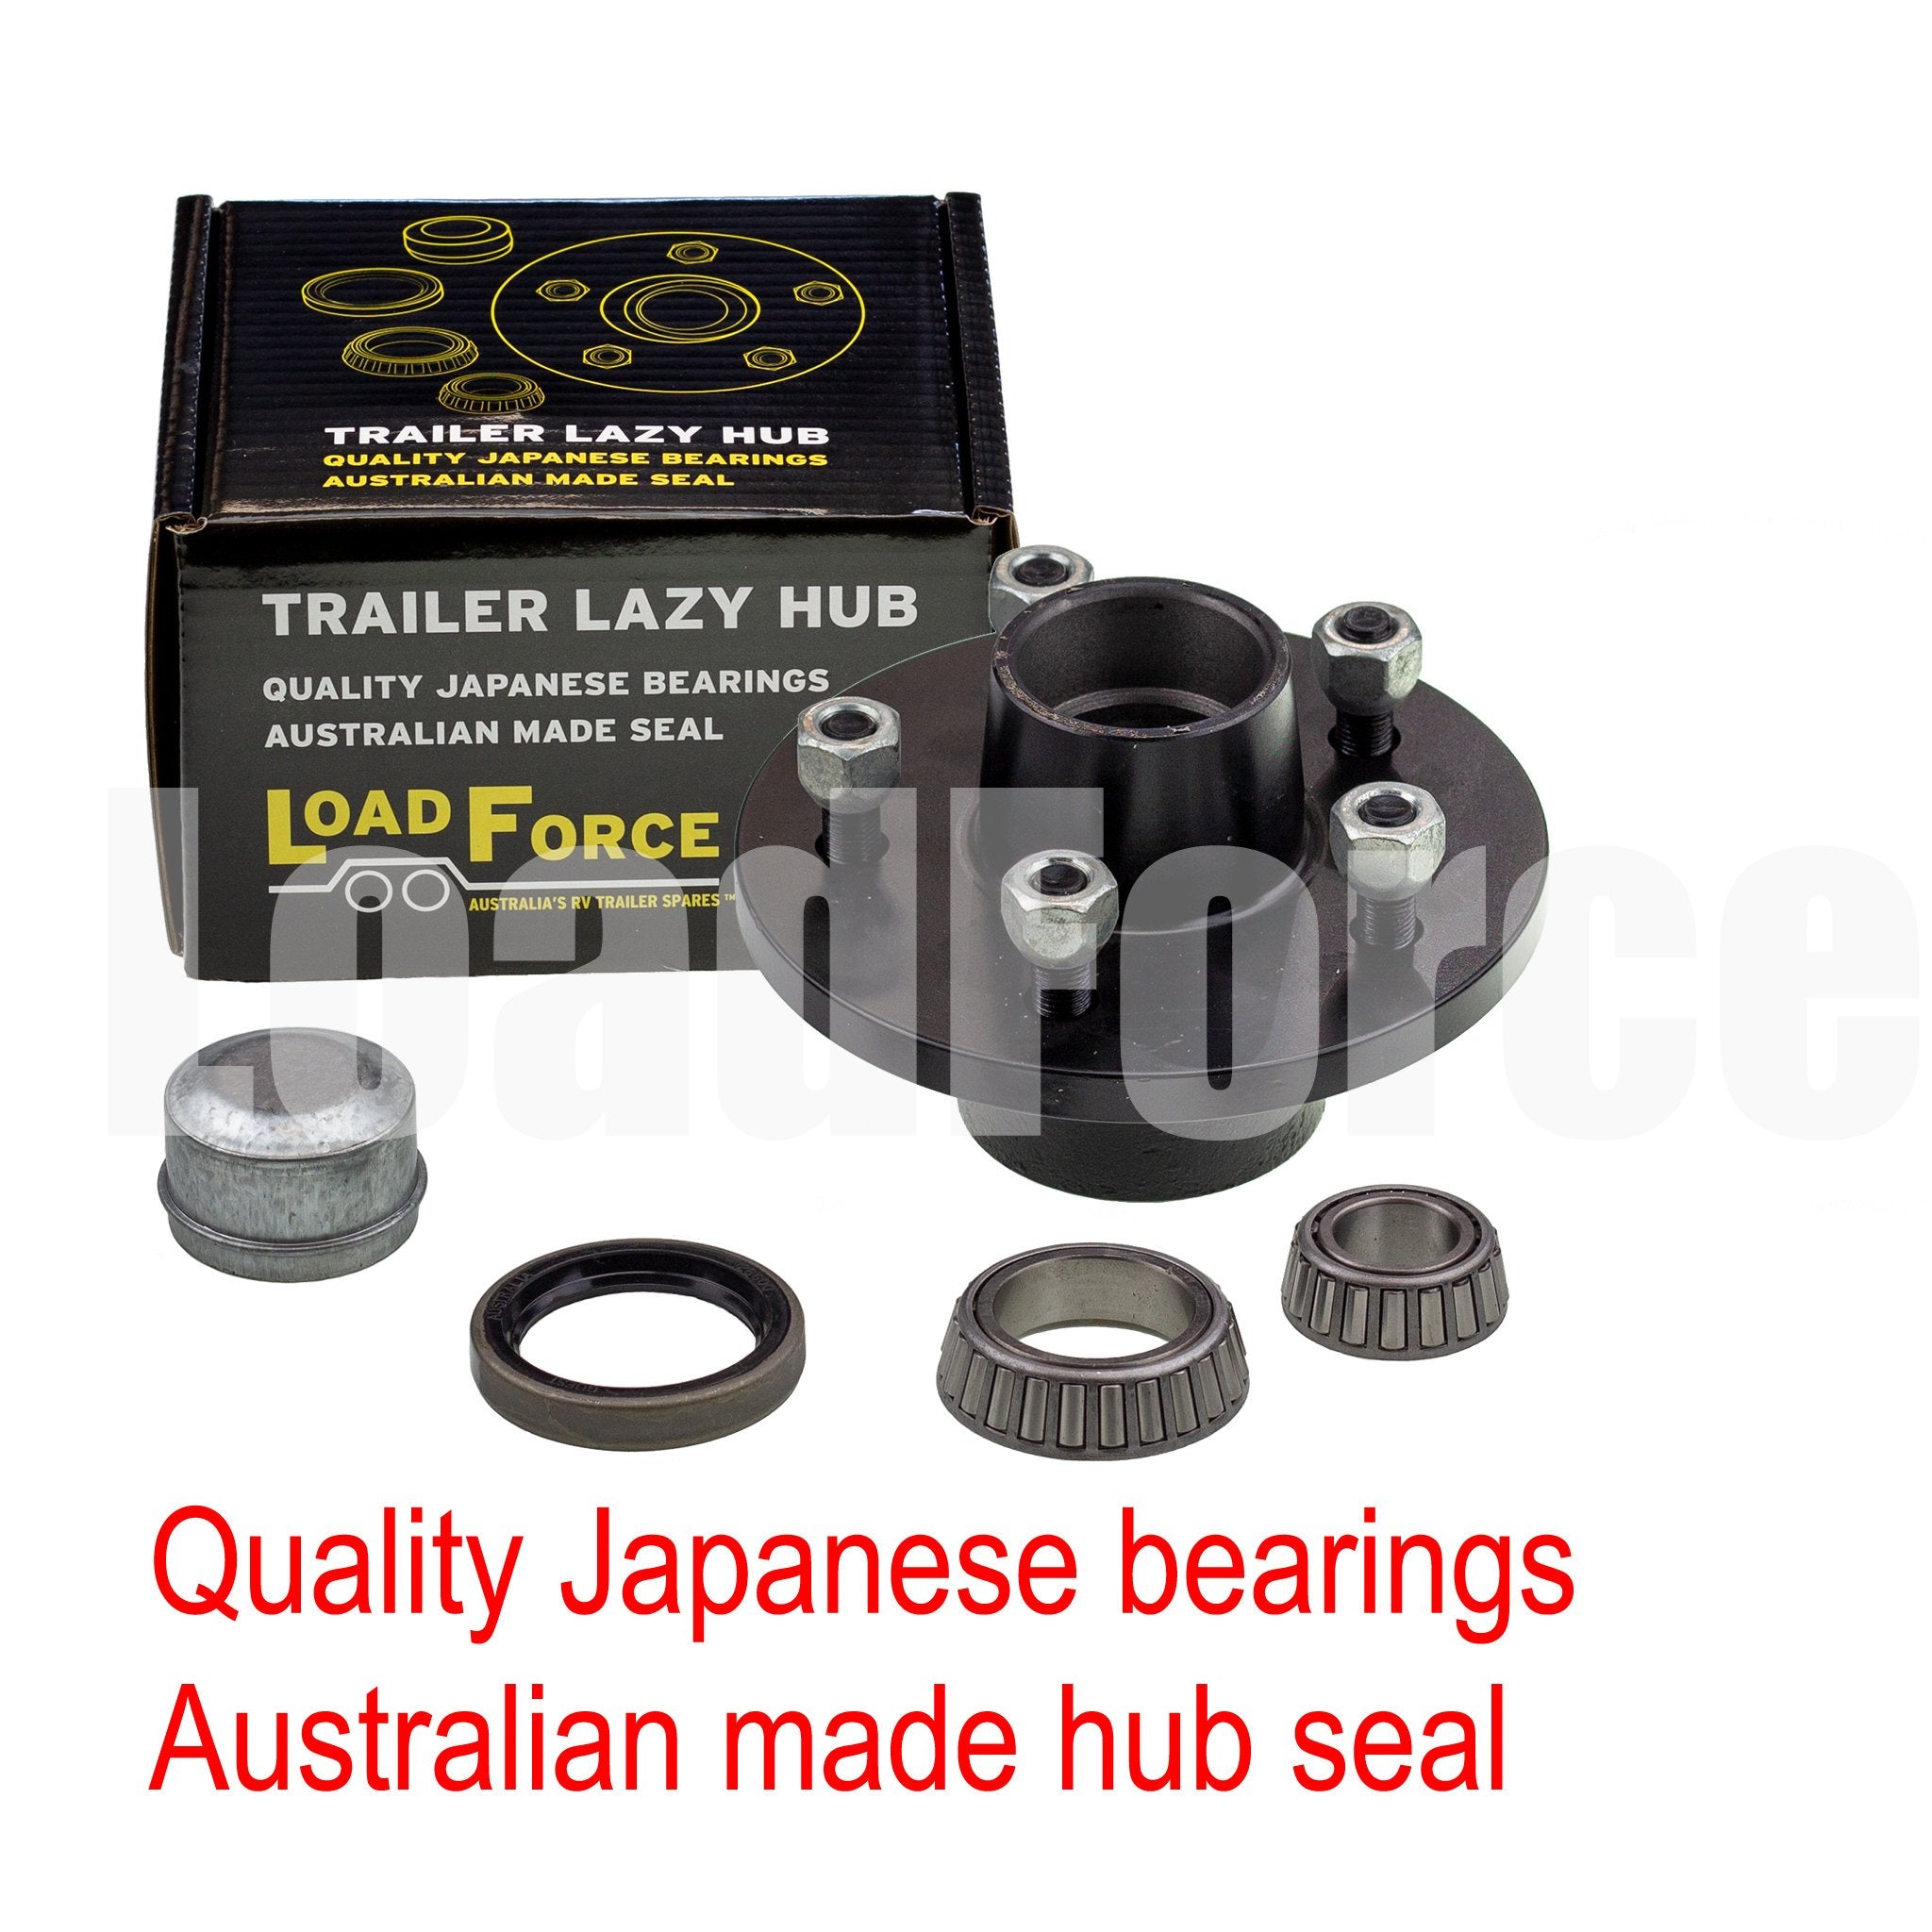 6 inch pcd ford 5 stud lm bearing lazy hub assembly